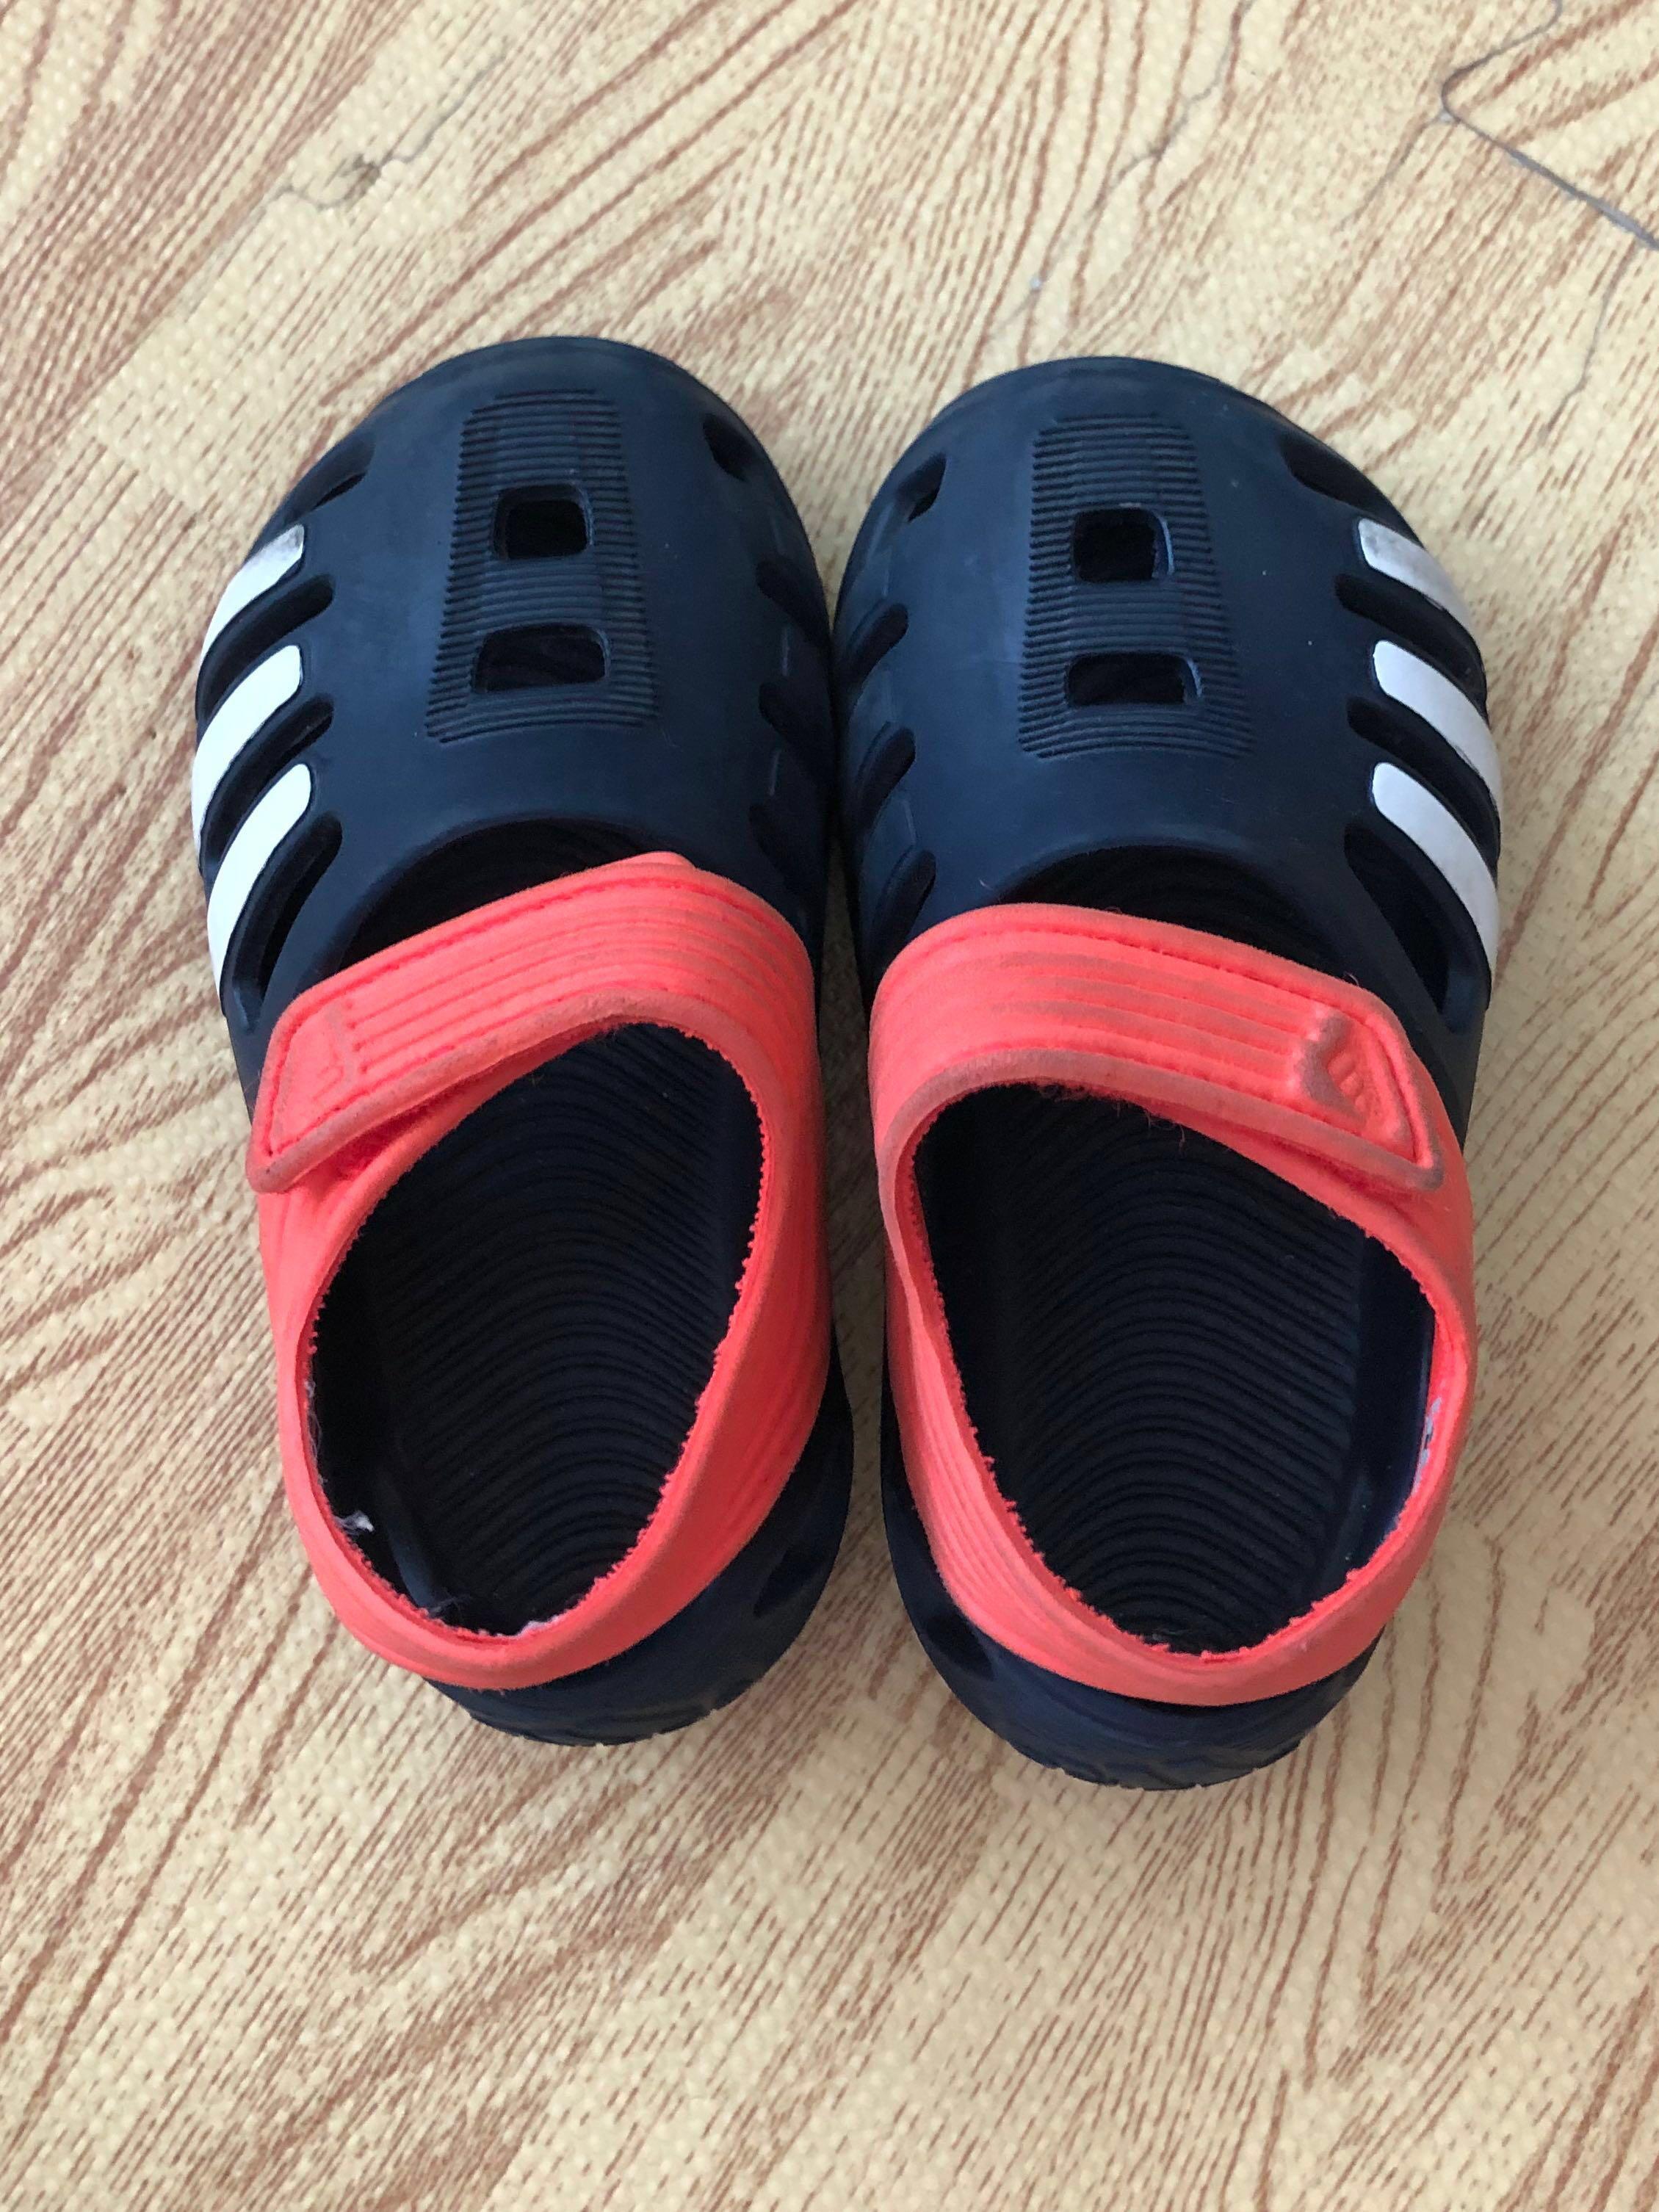 Adidas Sandals baby for 12-18 months 